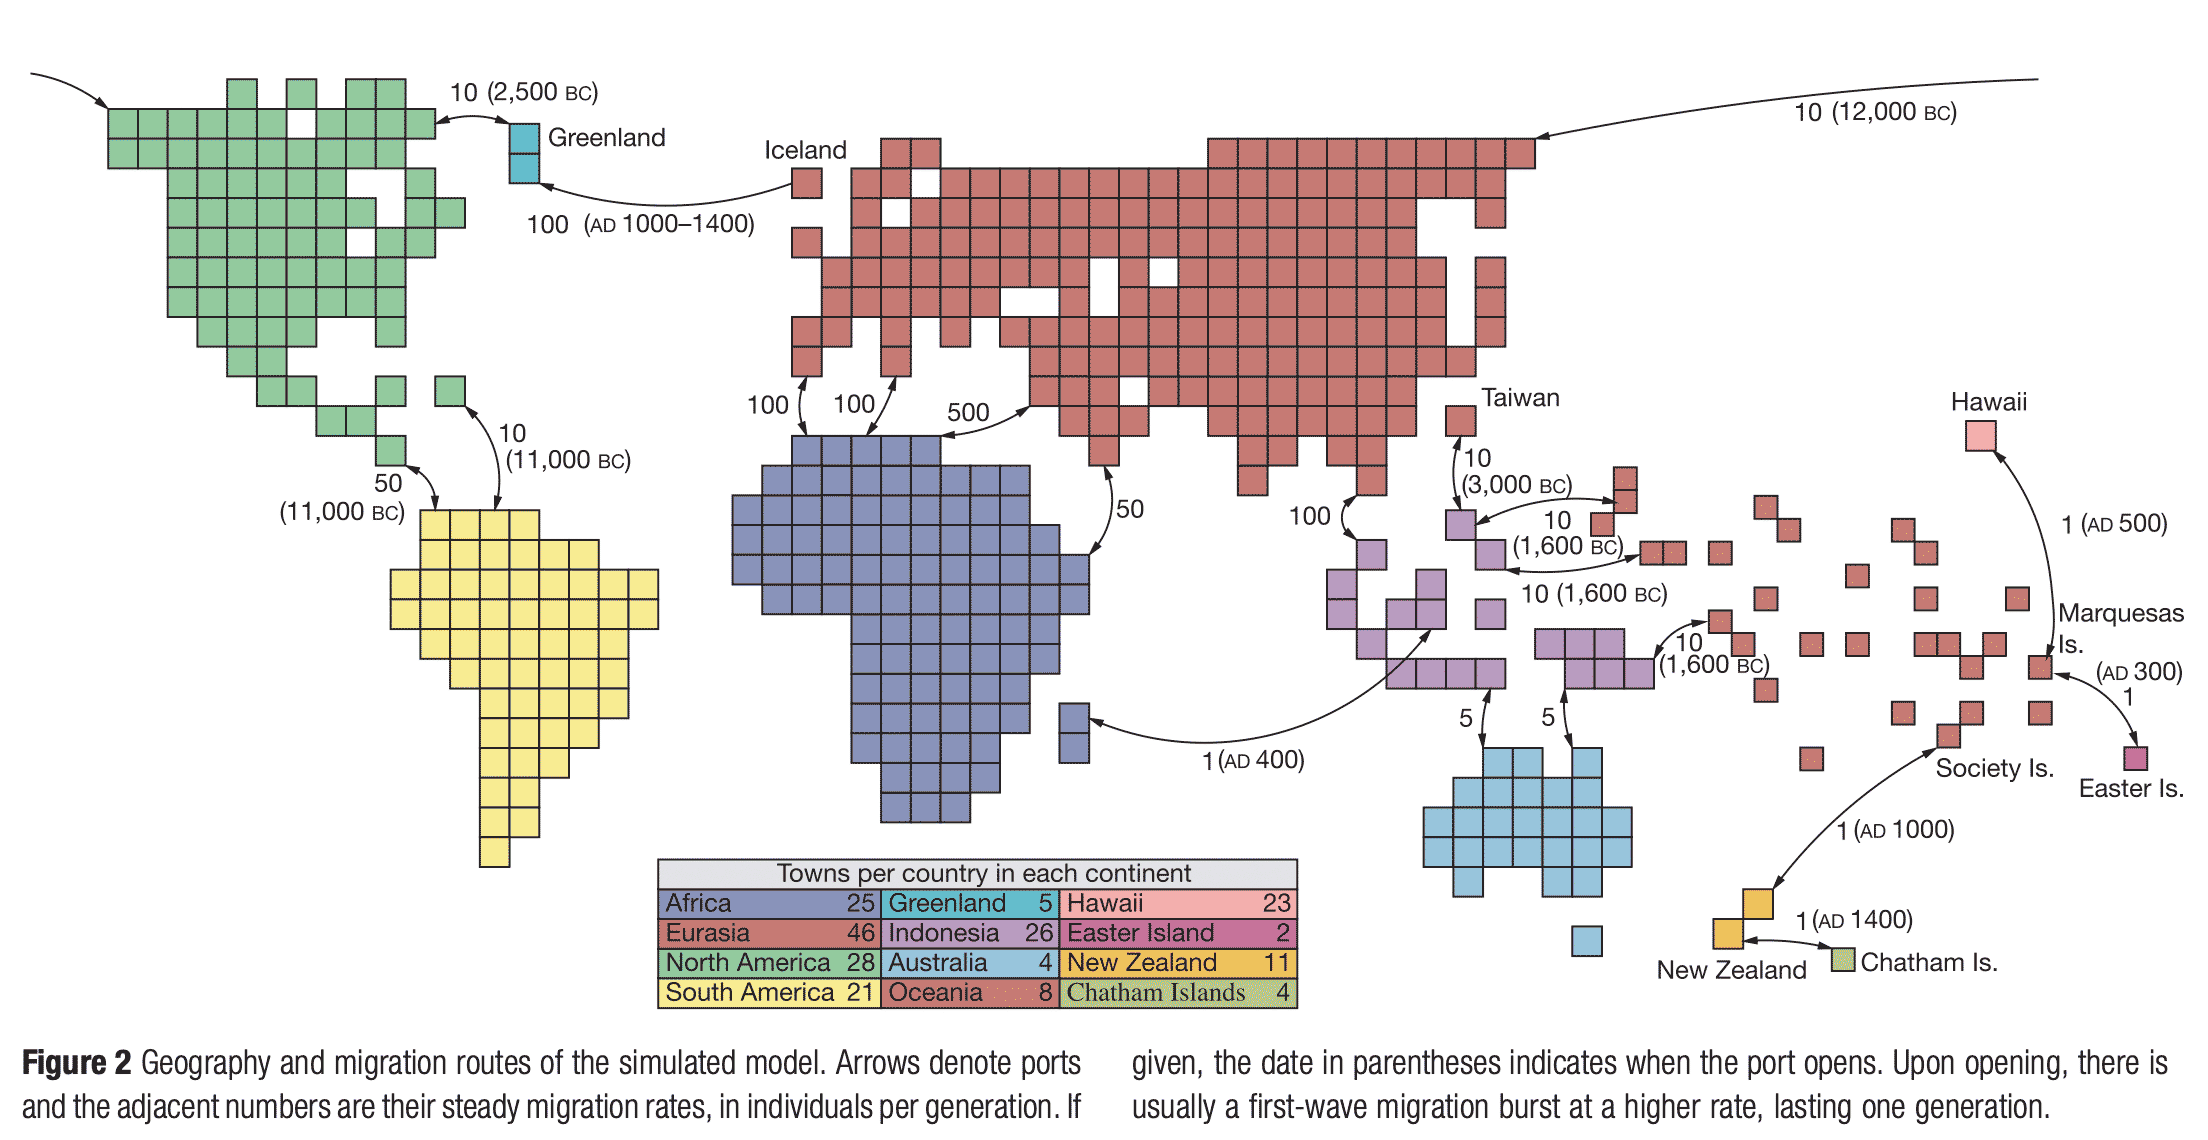 A map of the world with pixelated continents showing the population model of Rohde and coworkers 2004. 